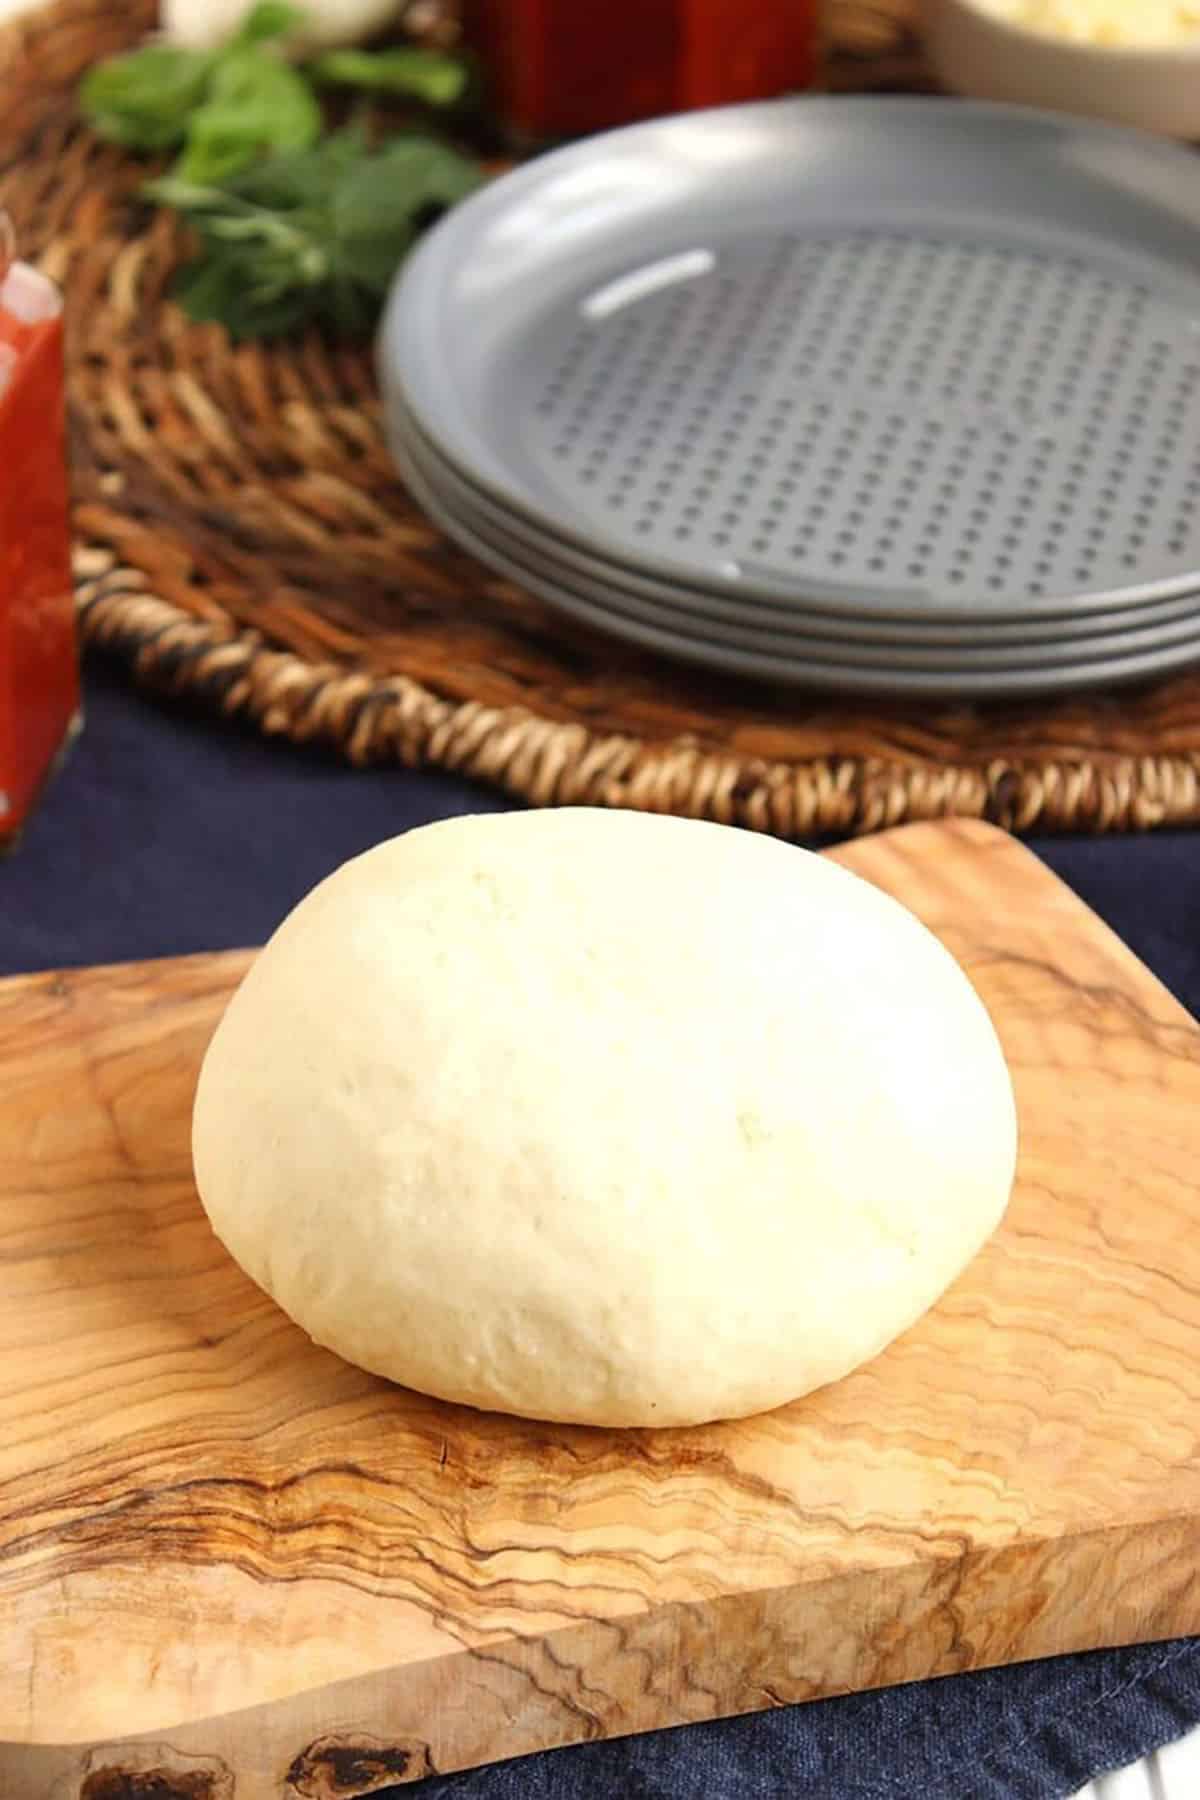 homemade pizza dough on an olive wood board with small pizza pans in the background.